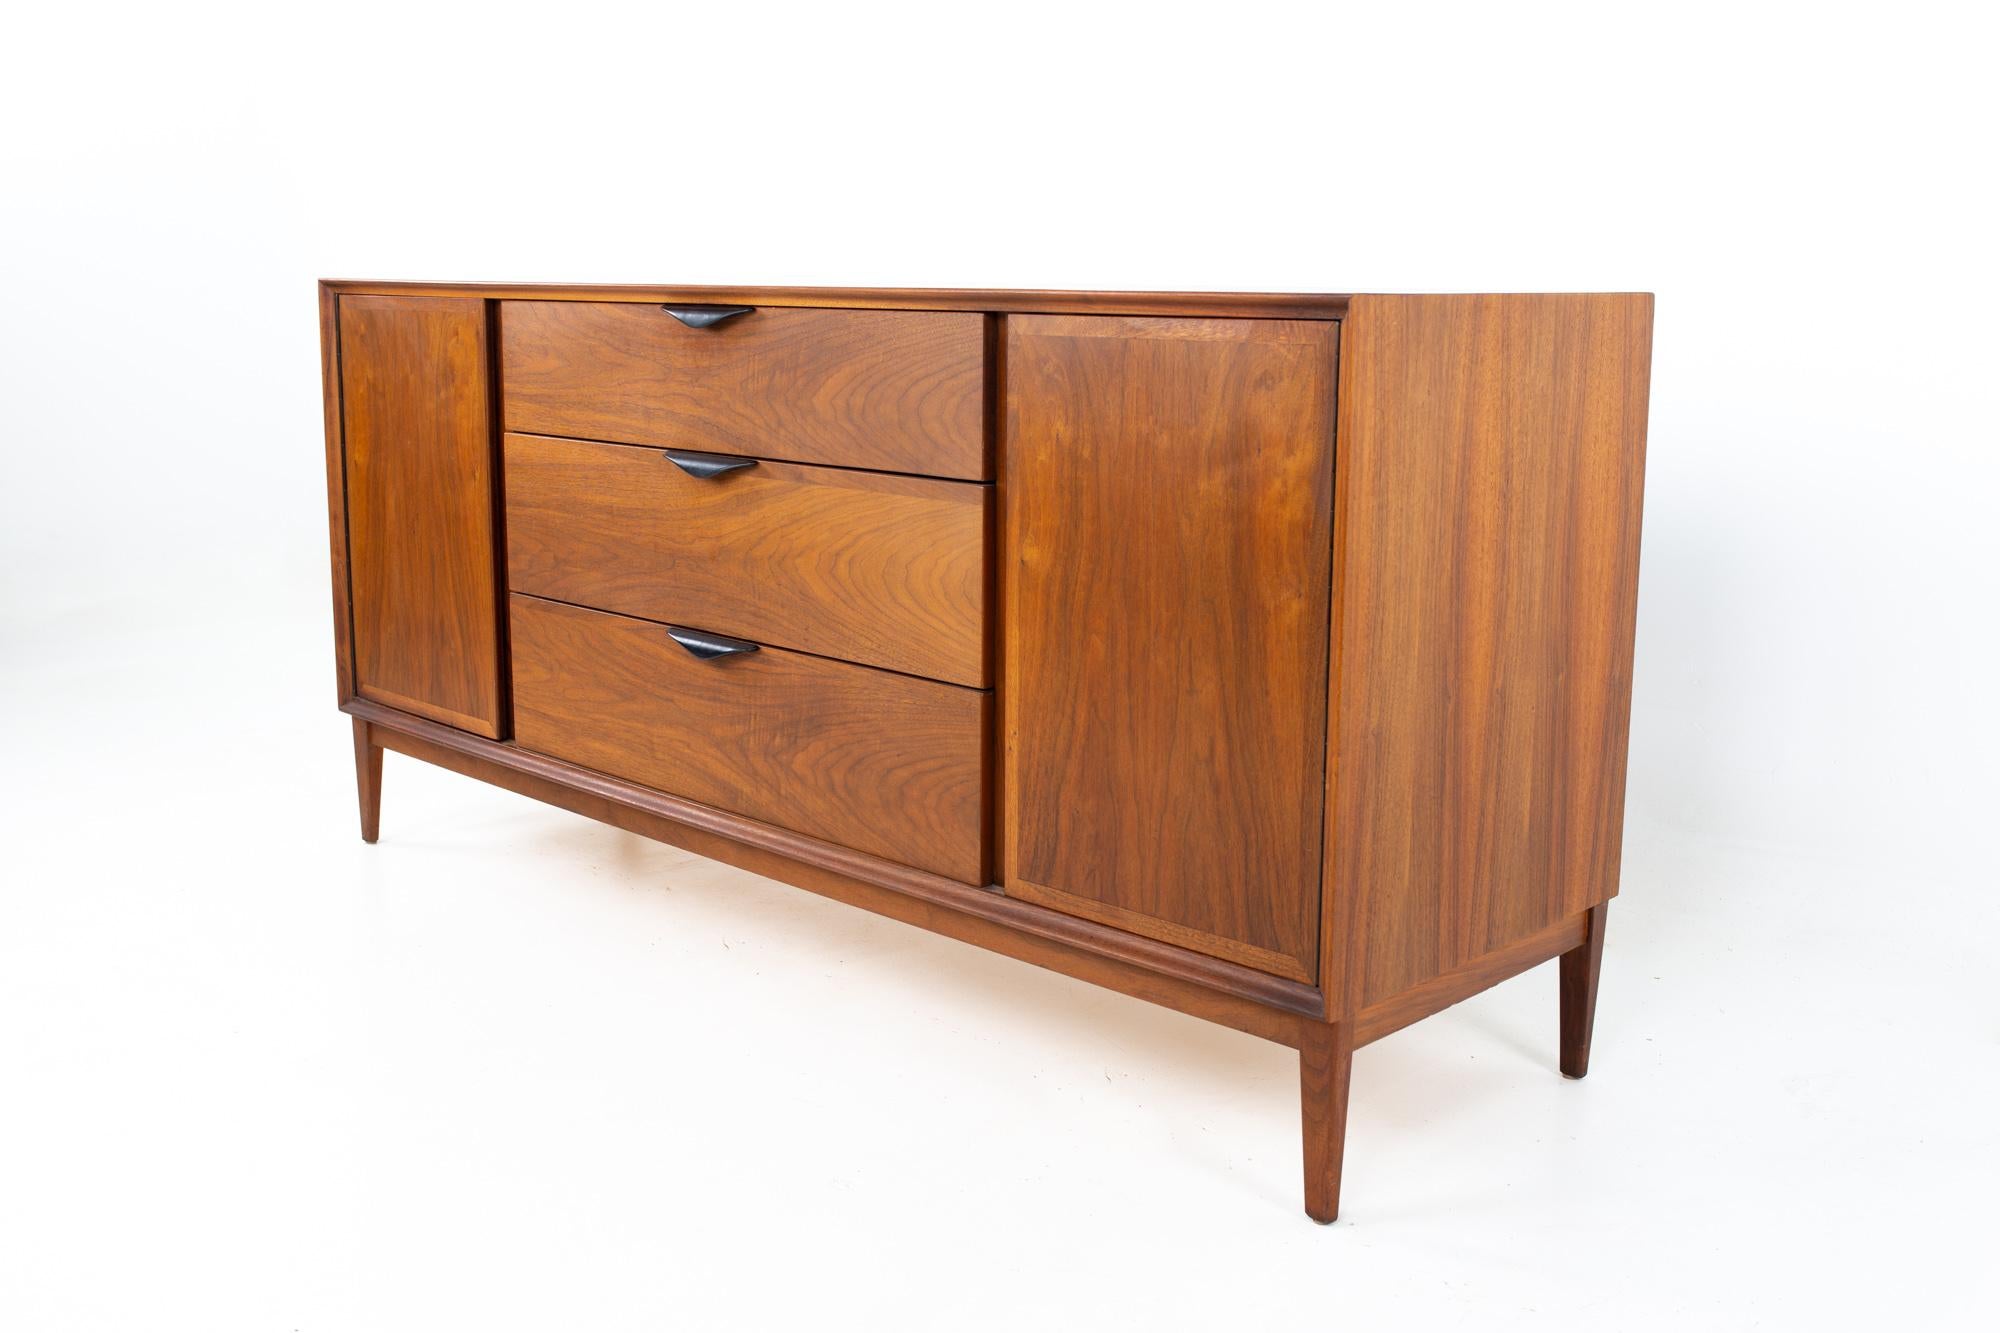 Dillingham mid century walnut sideboard buffet credenza
Credenza measures: 64 wide x 19 deep x 30.25 inches high

All pieces of furniture can be had in what we call restored vintage condition. That means the piece is restored upon purchase so